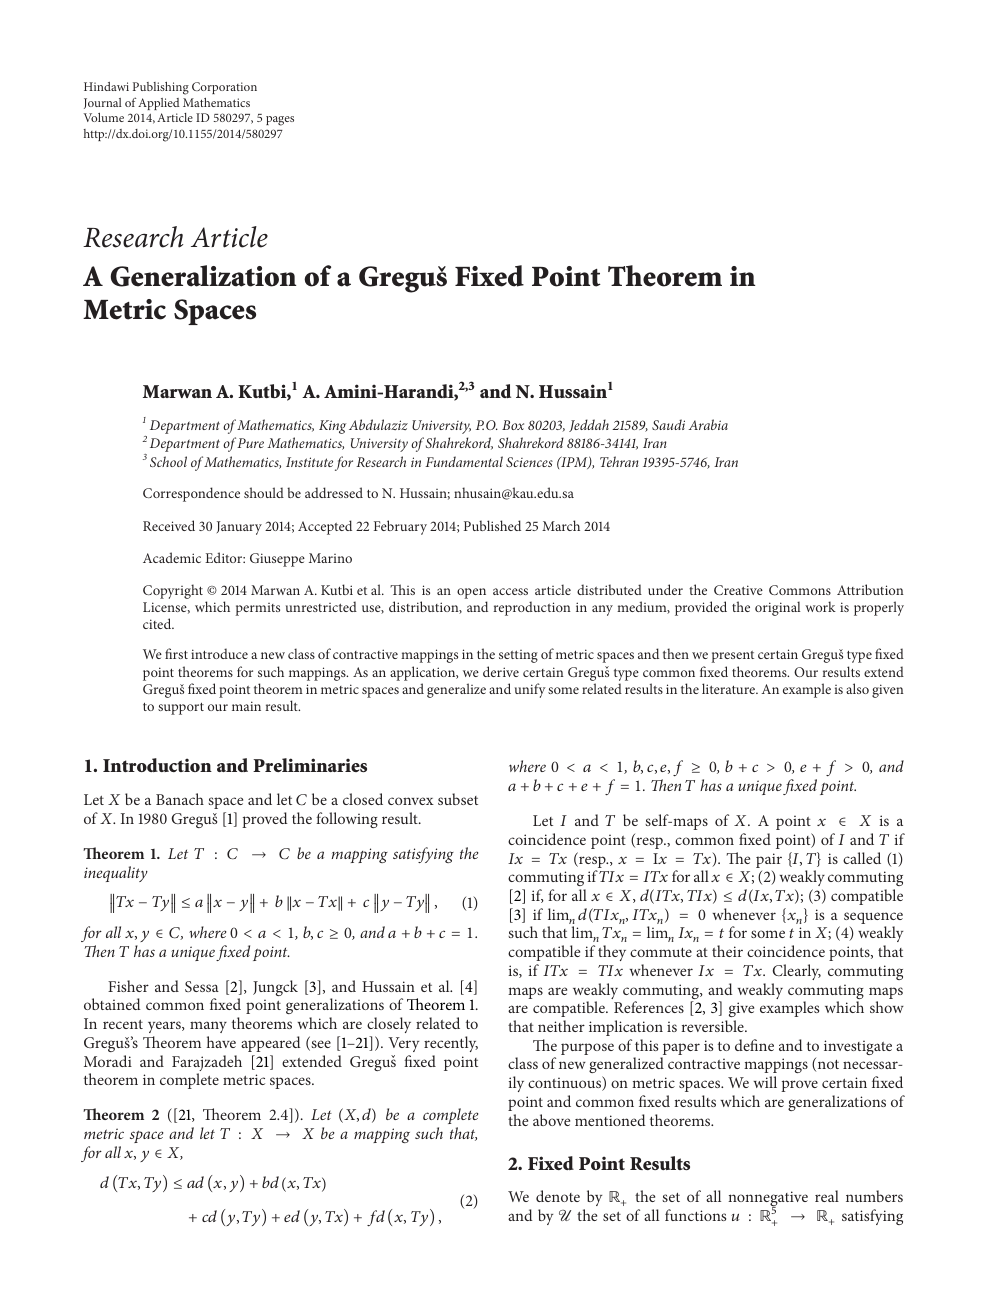 A Generalization Of A Gregus Fixed Point Theorem In Metric Spaces Topic Of Research Paper In Mathematics Download Scholarly Article Pdf And Read For Free On Cyberleninka Open Science Hub